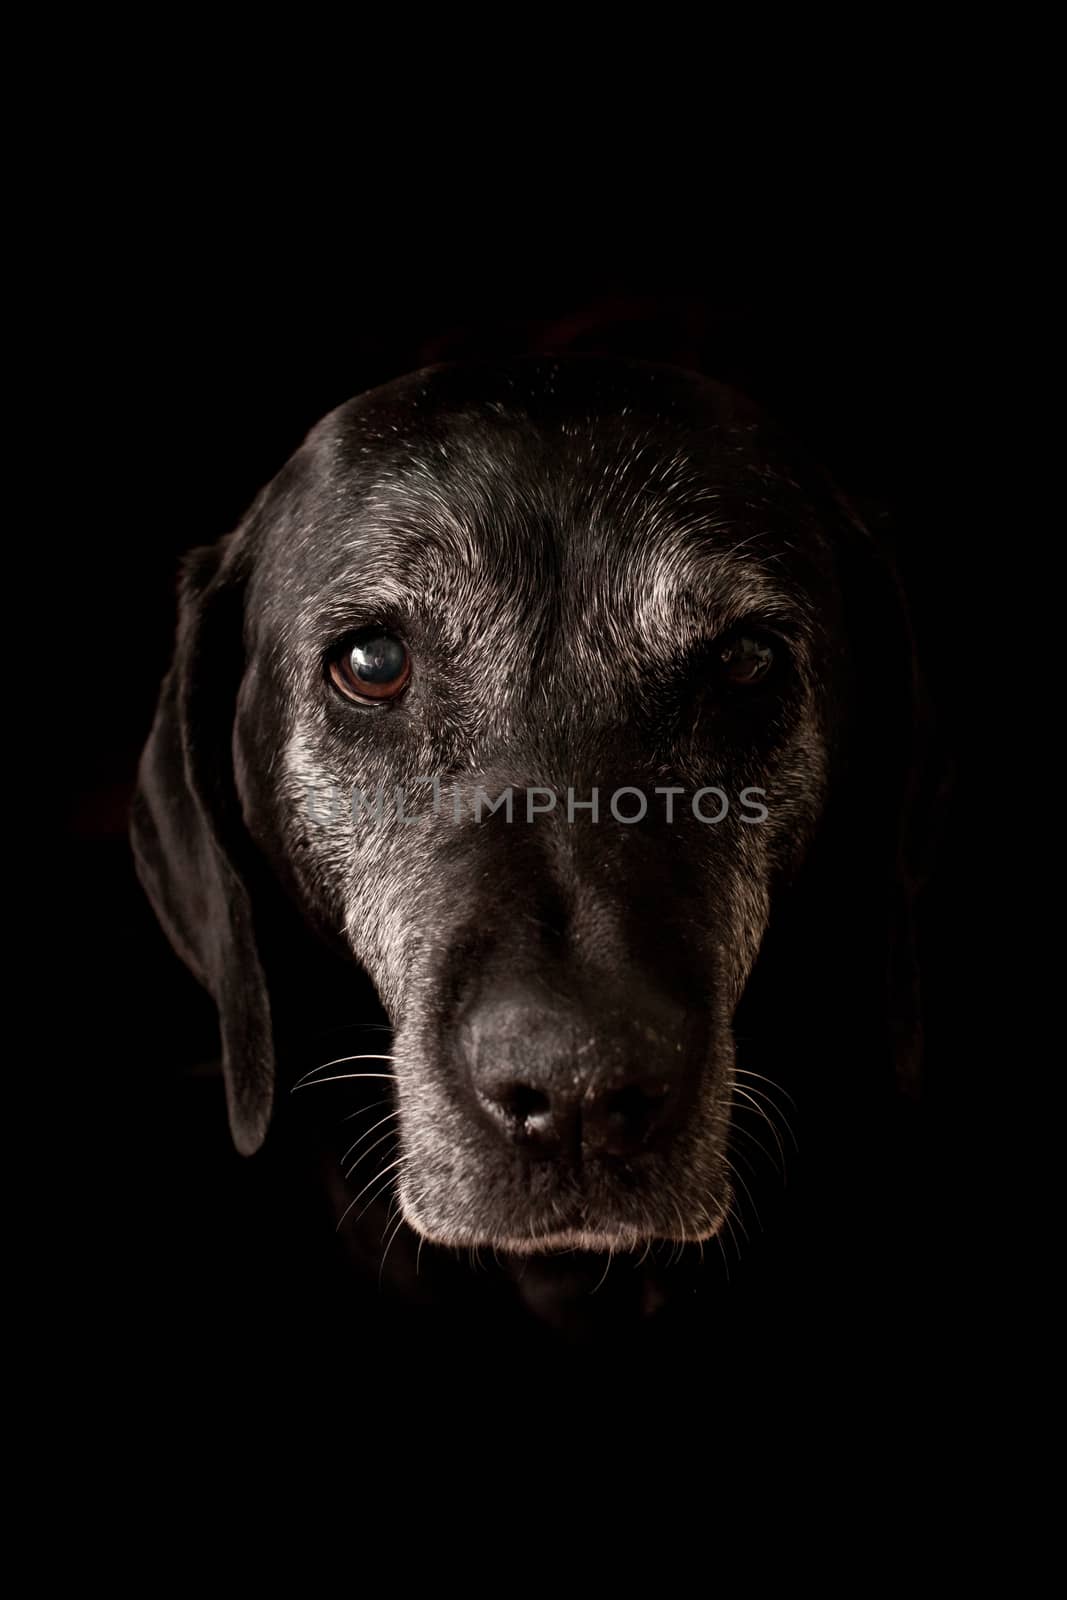 Sad Old Dog Looking at the Camera - Isolated on Black Background